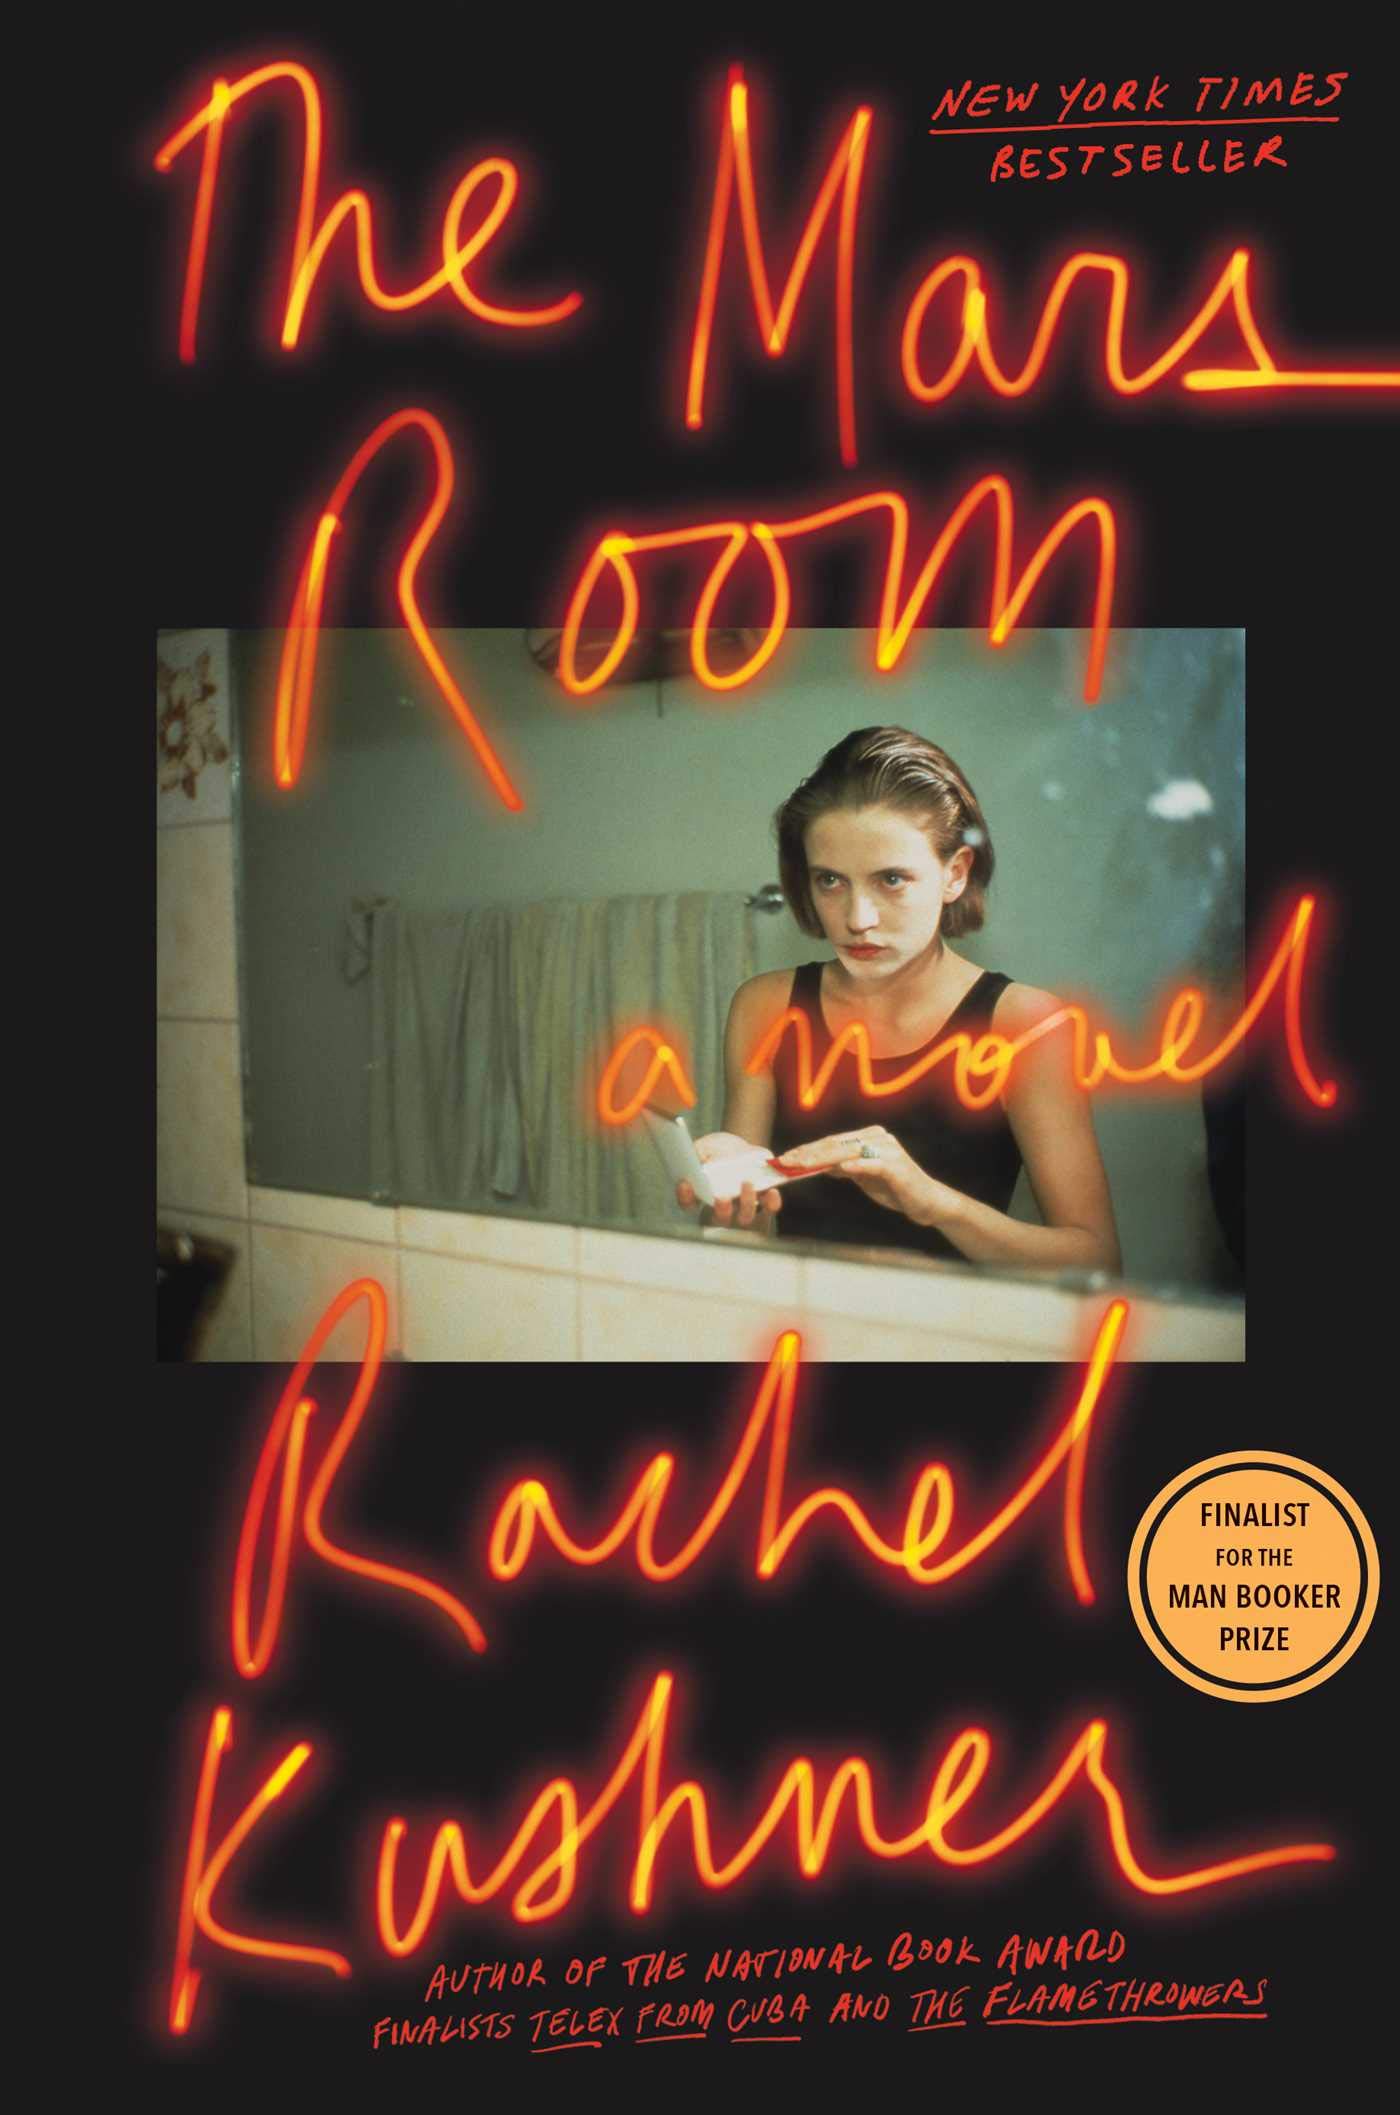 A book cover for The Mars Room